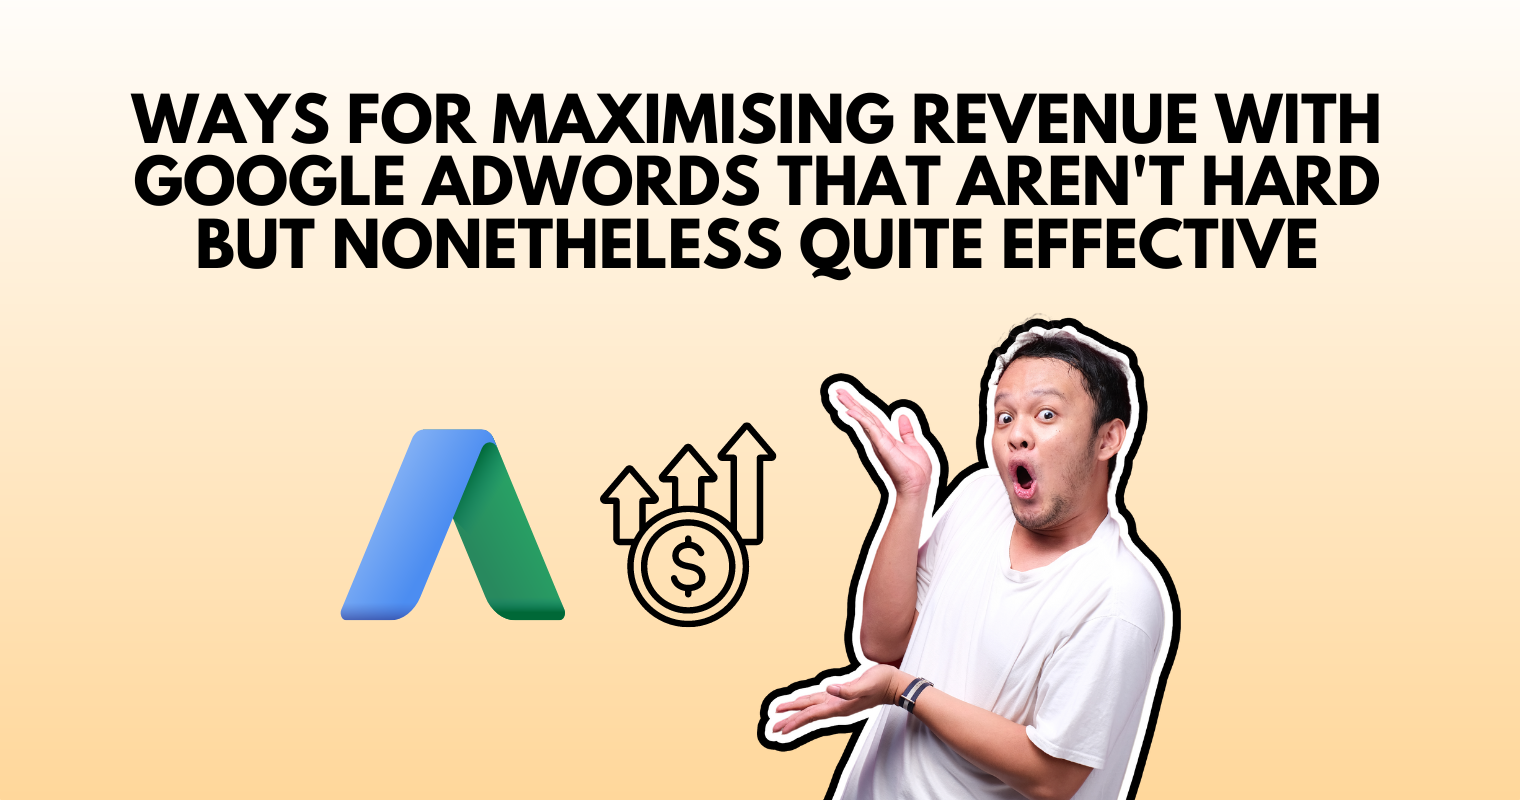 Ways for maximising revenue with Google AdWords that aren’t hard but nonetheless quite effective